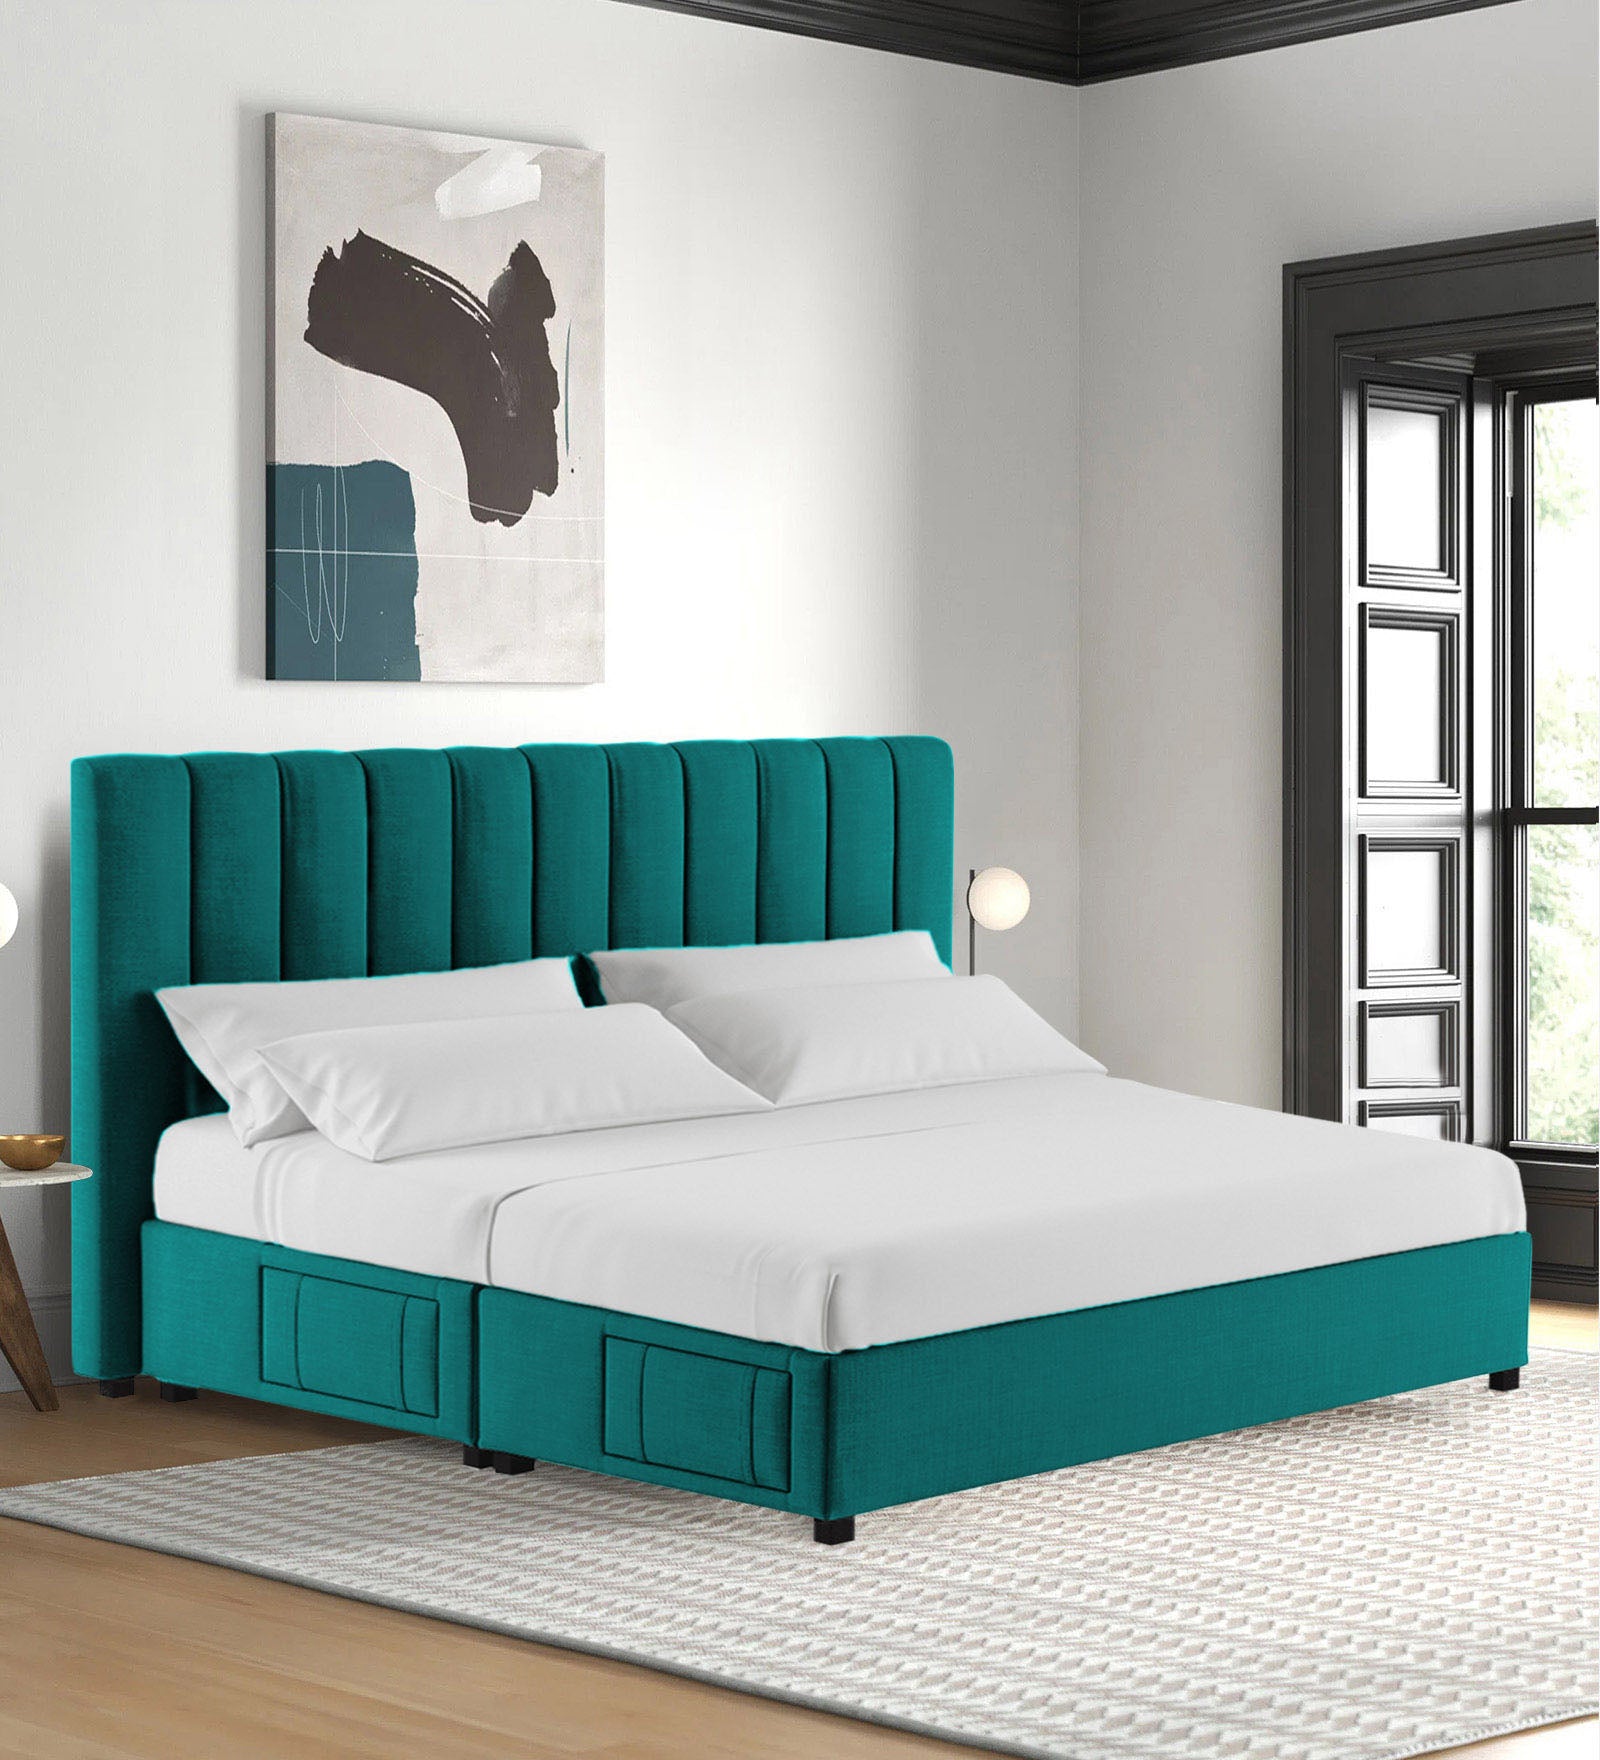 Nivi Fabric King Size Bed In Sea Green Colour With Drawer Storage